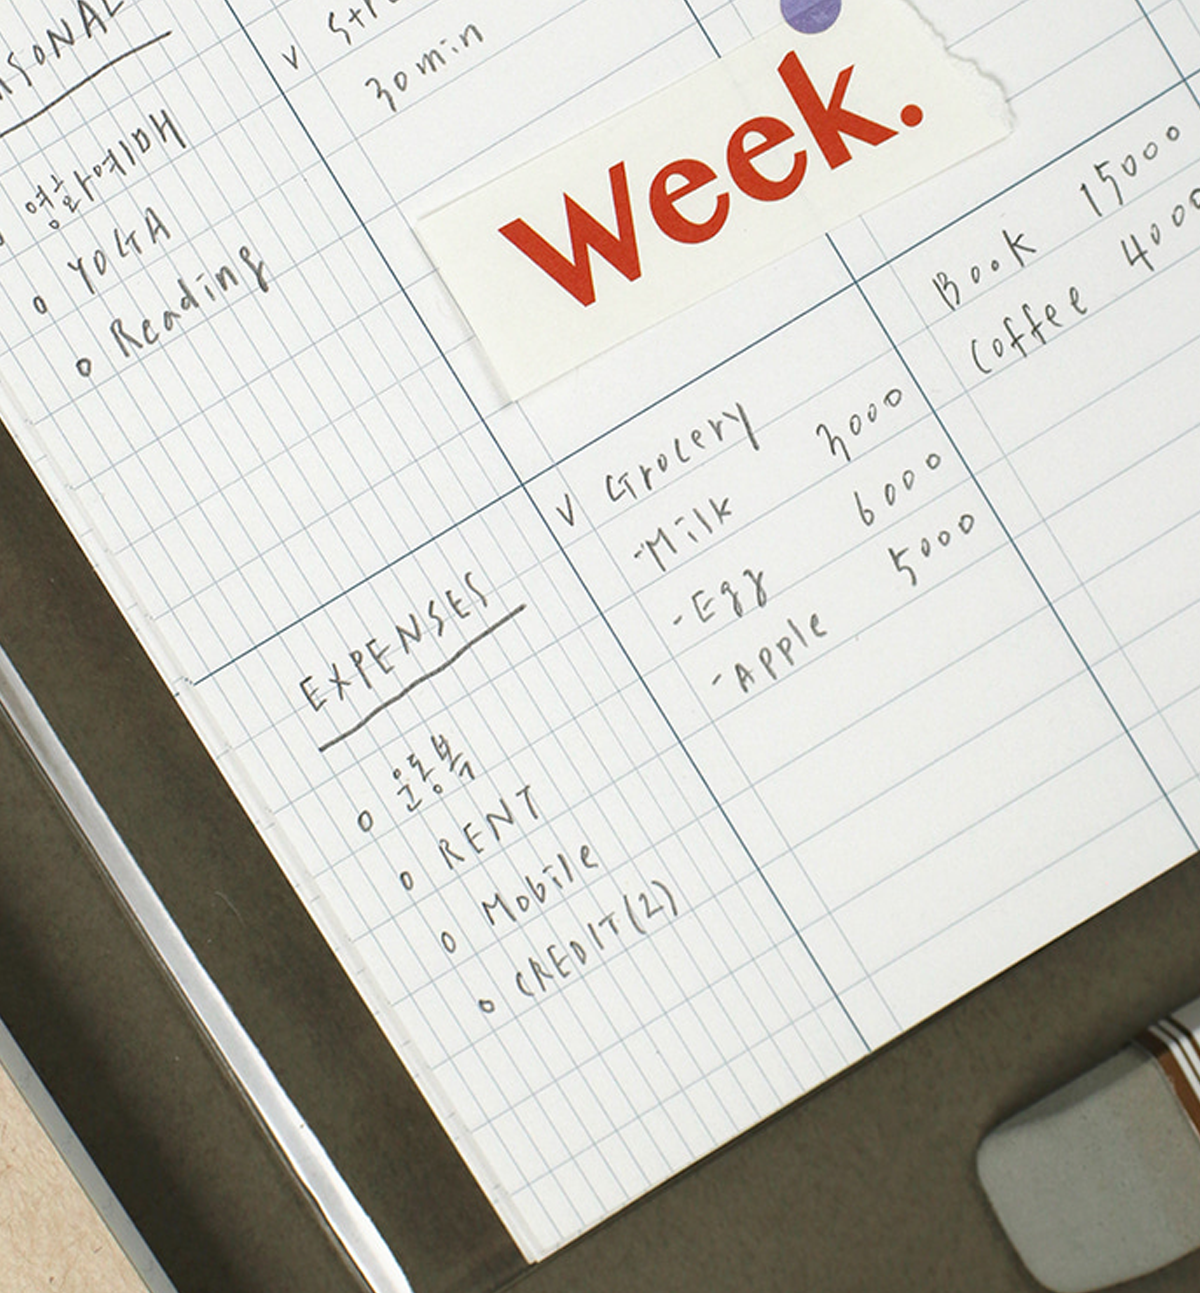 List to Live By Weekly Planner [Three Row]